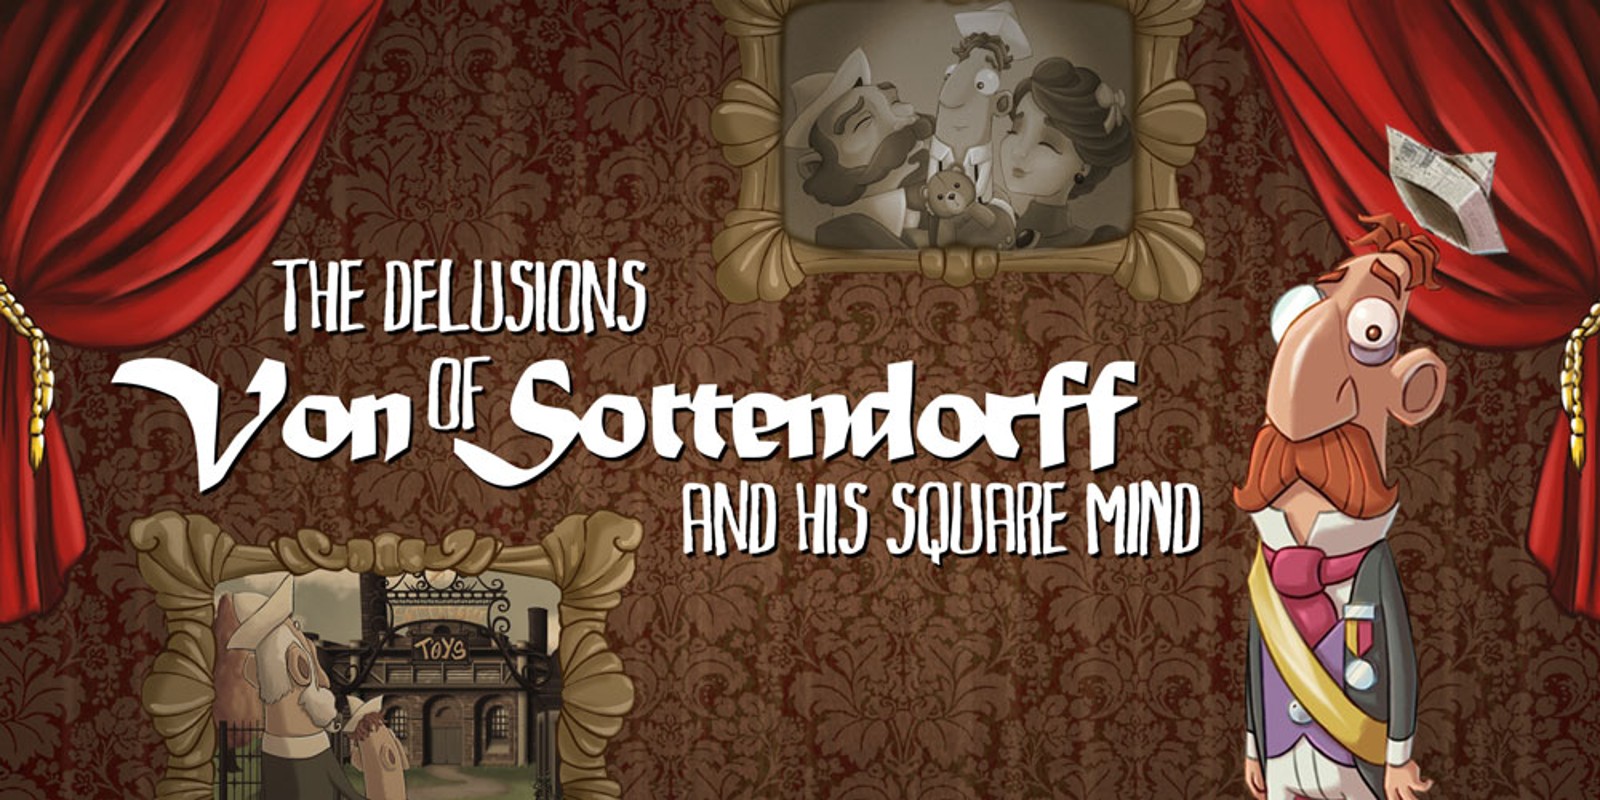 The Delusions of Von Sottendorff and his Square Mind